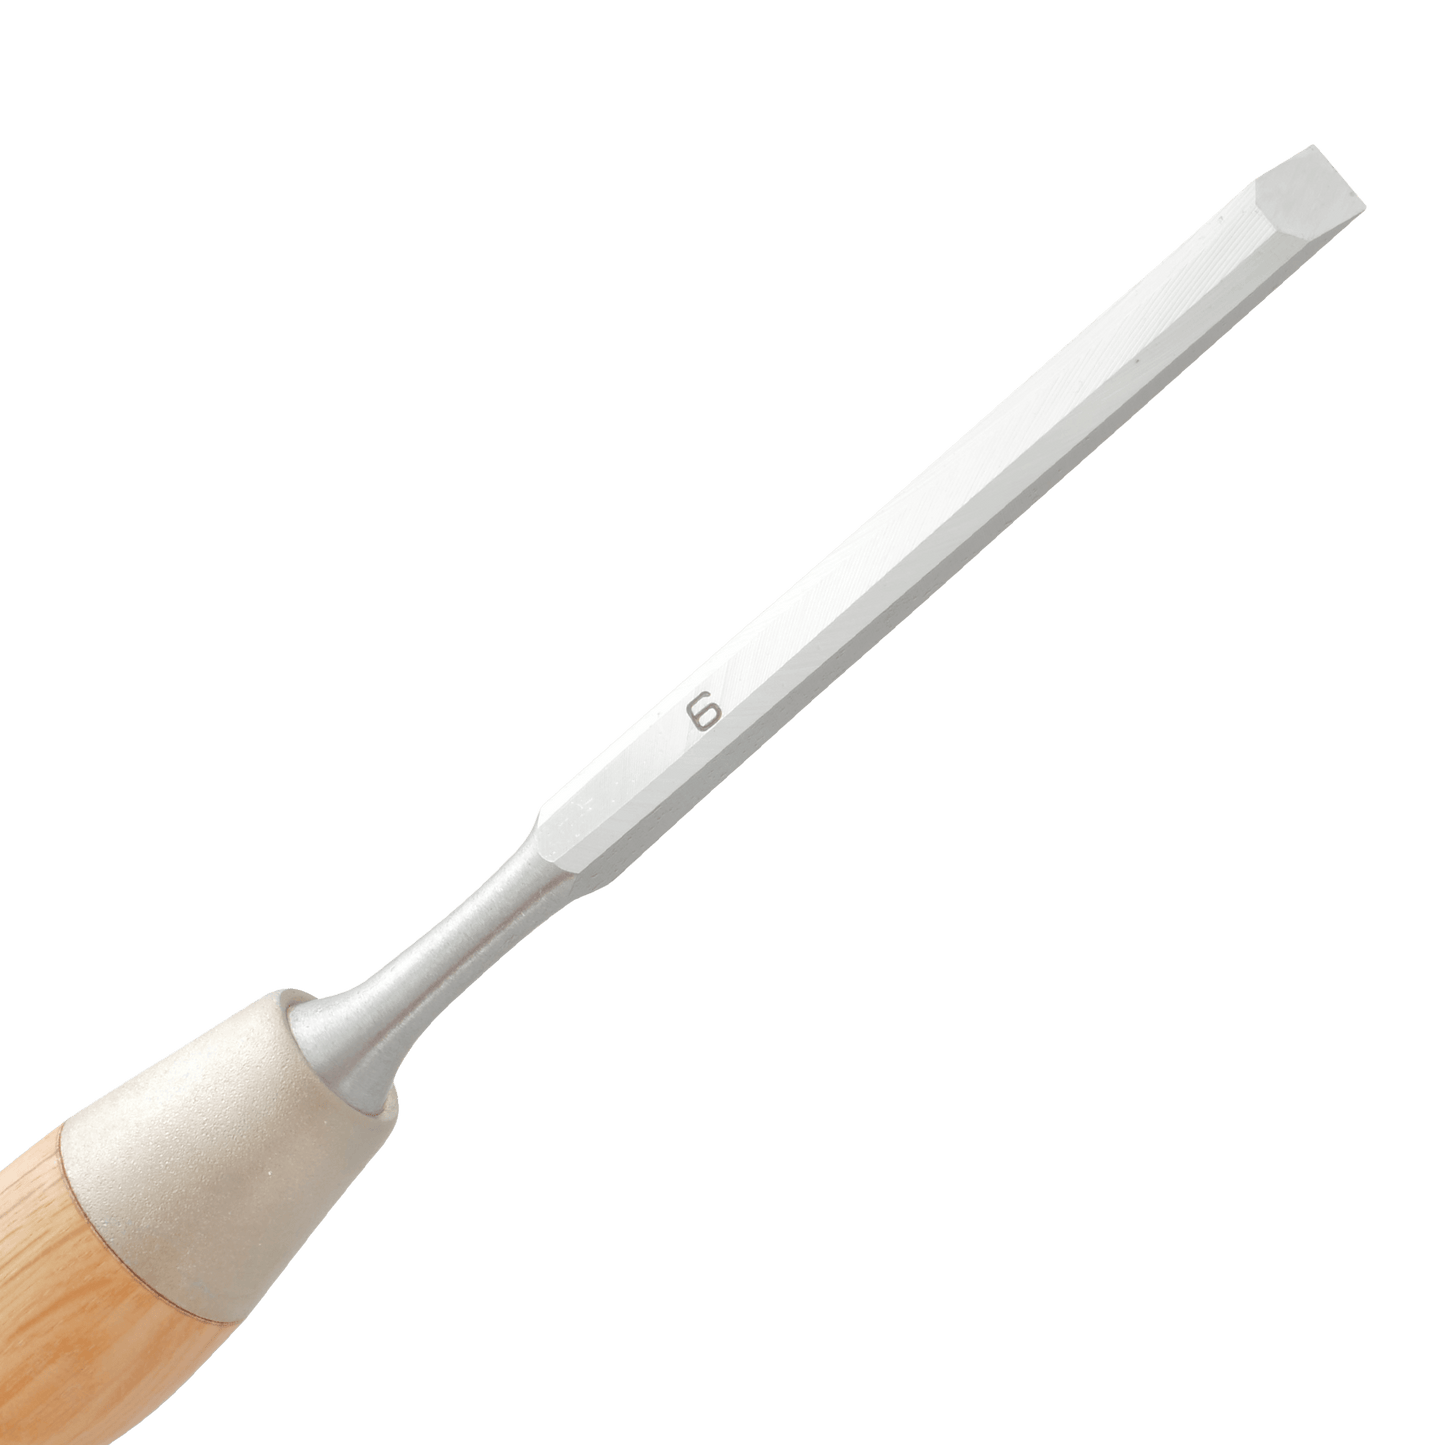 The Japanese chisel you have been wanting for some time is now available only a few clicks away! Get your KAKURI chisel from Sigtools today, they are like hot knife through butter! 